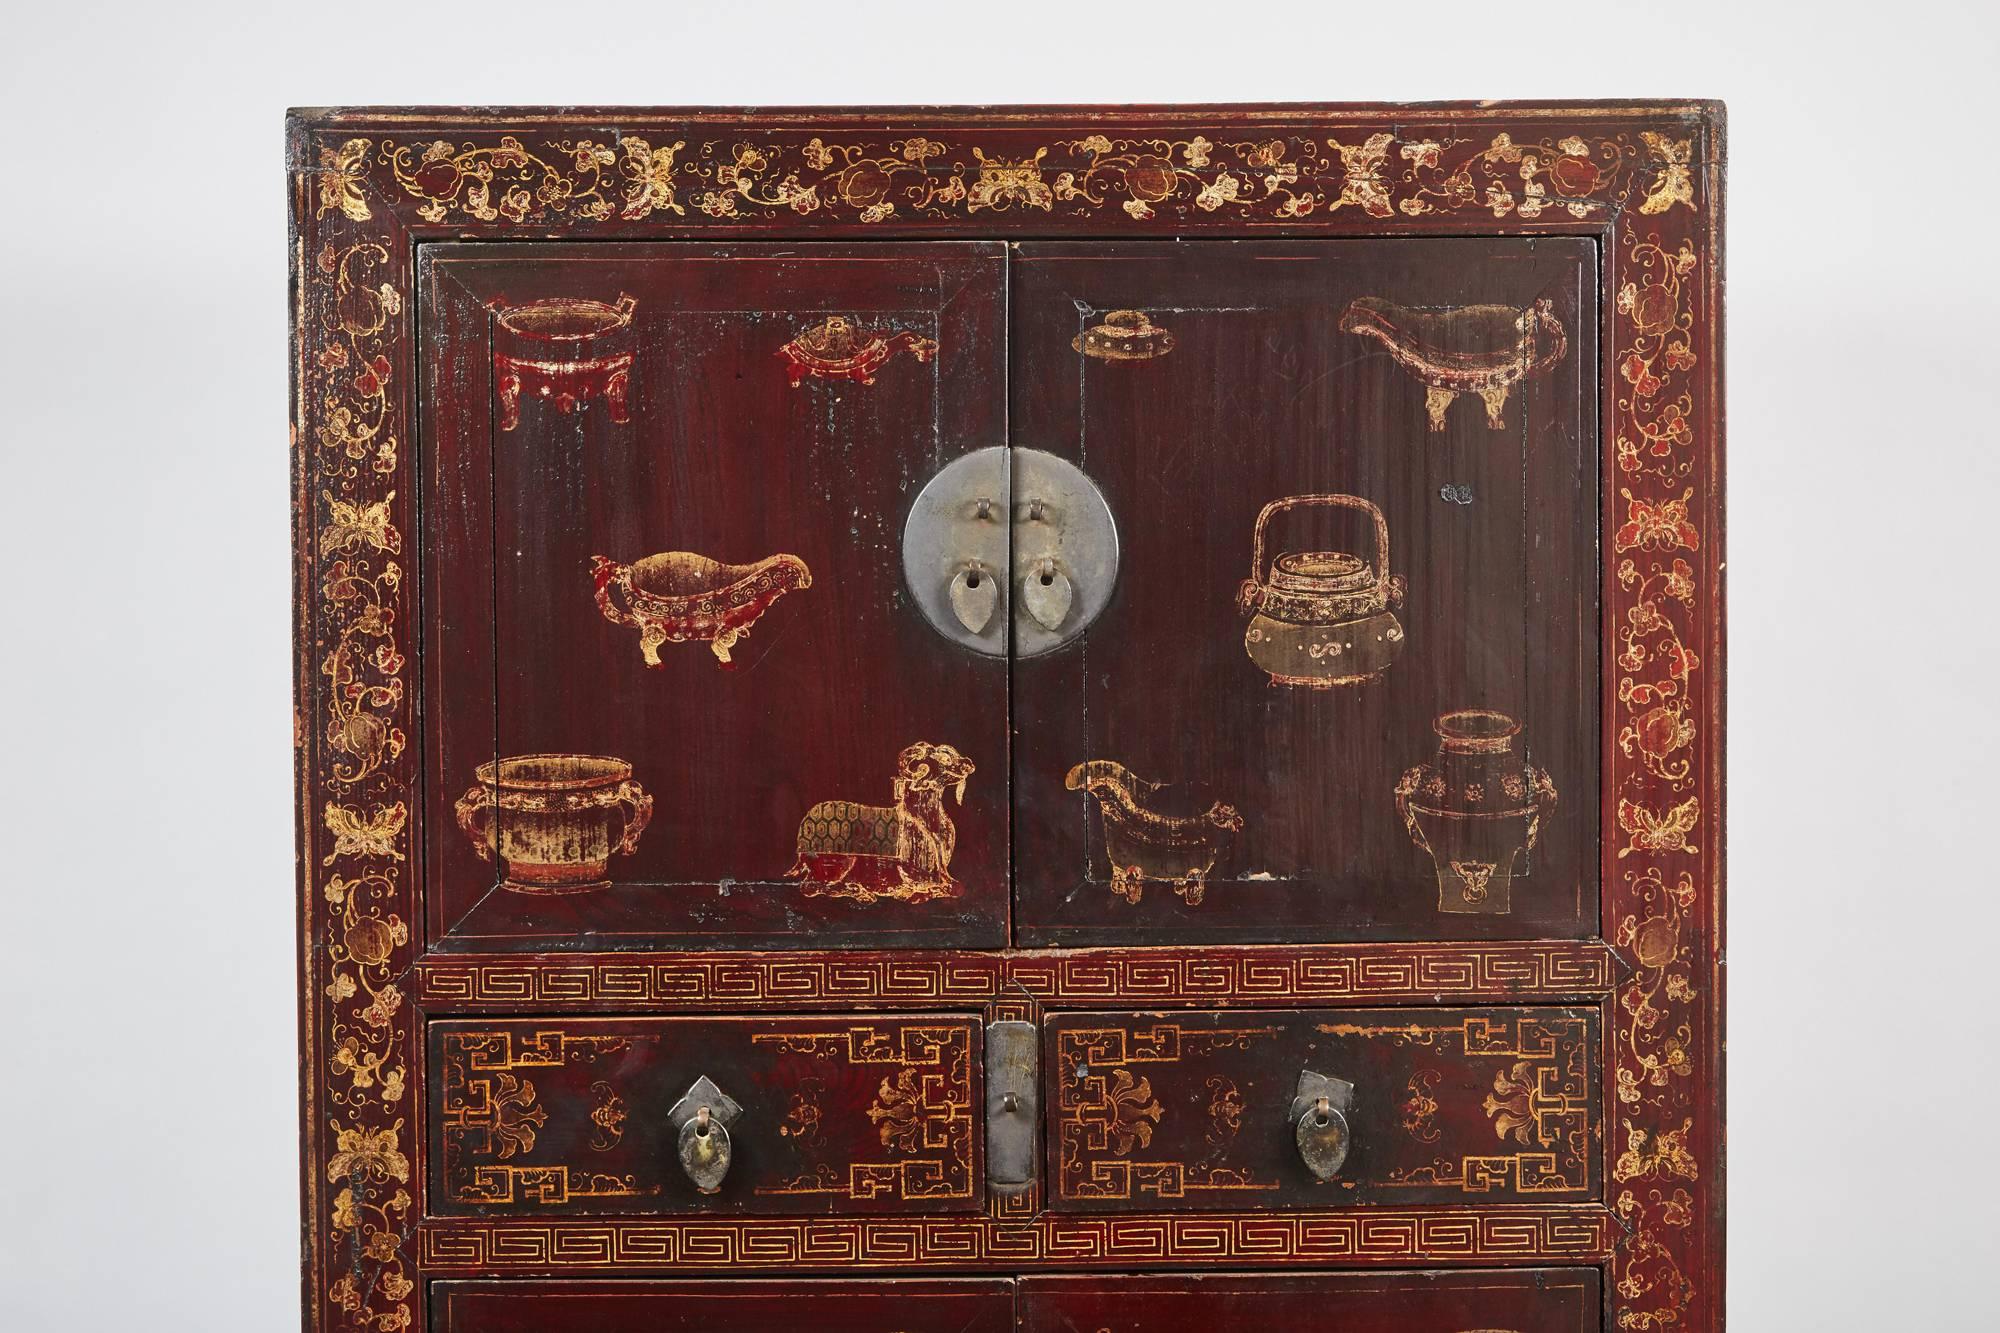 A 19th century black and red lacquered Chinese cabinet with chinoiserie in the front. The cabinet has two small doors on top, just below are two small drawers and below that are larger doors.